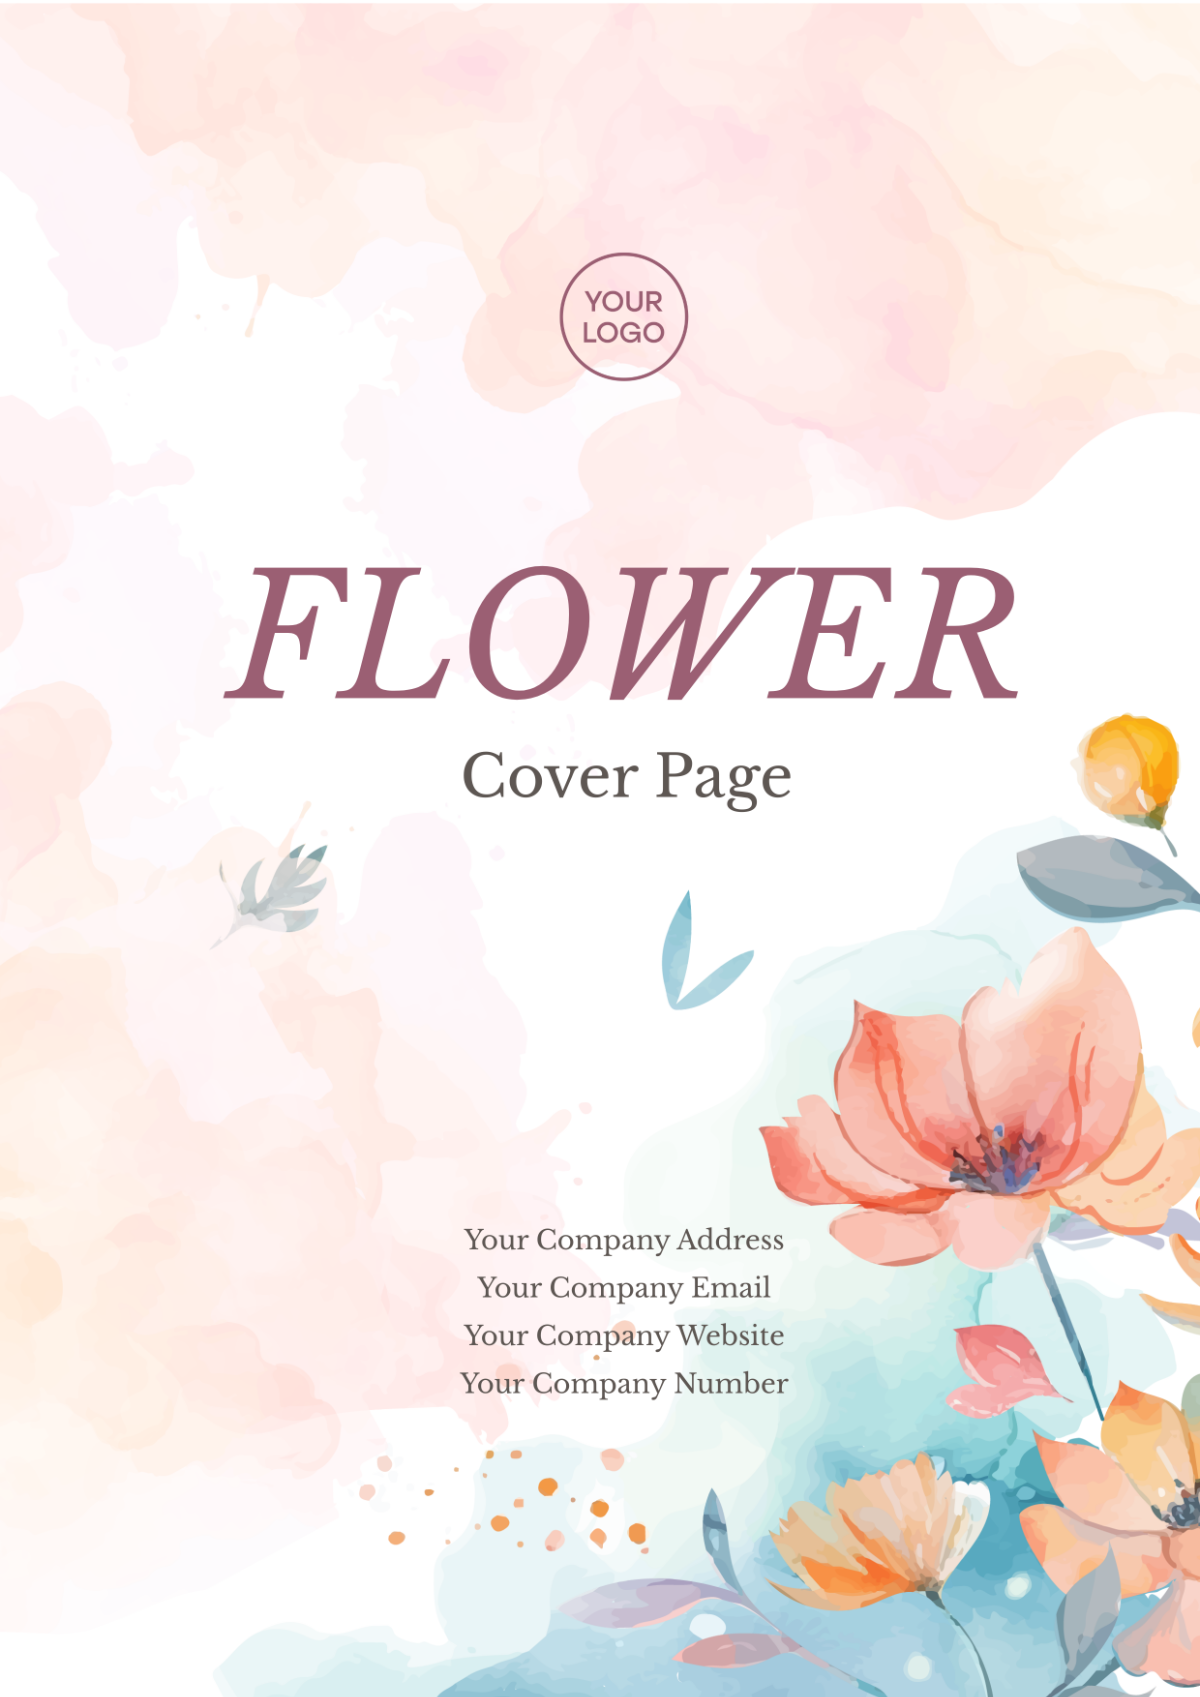 Flower Cover Page Image